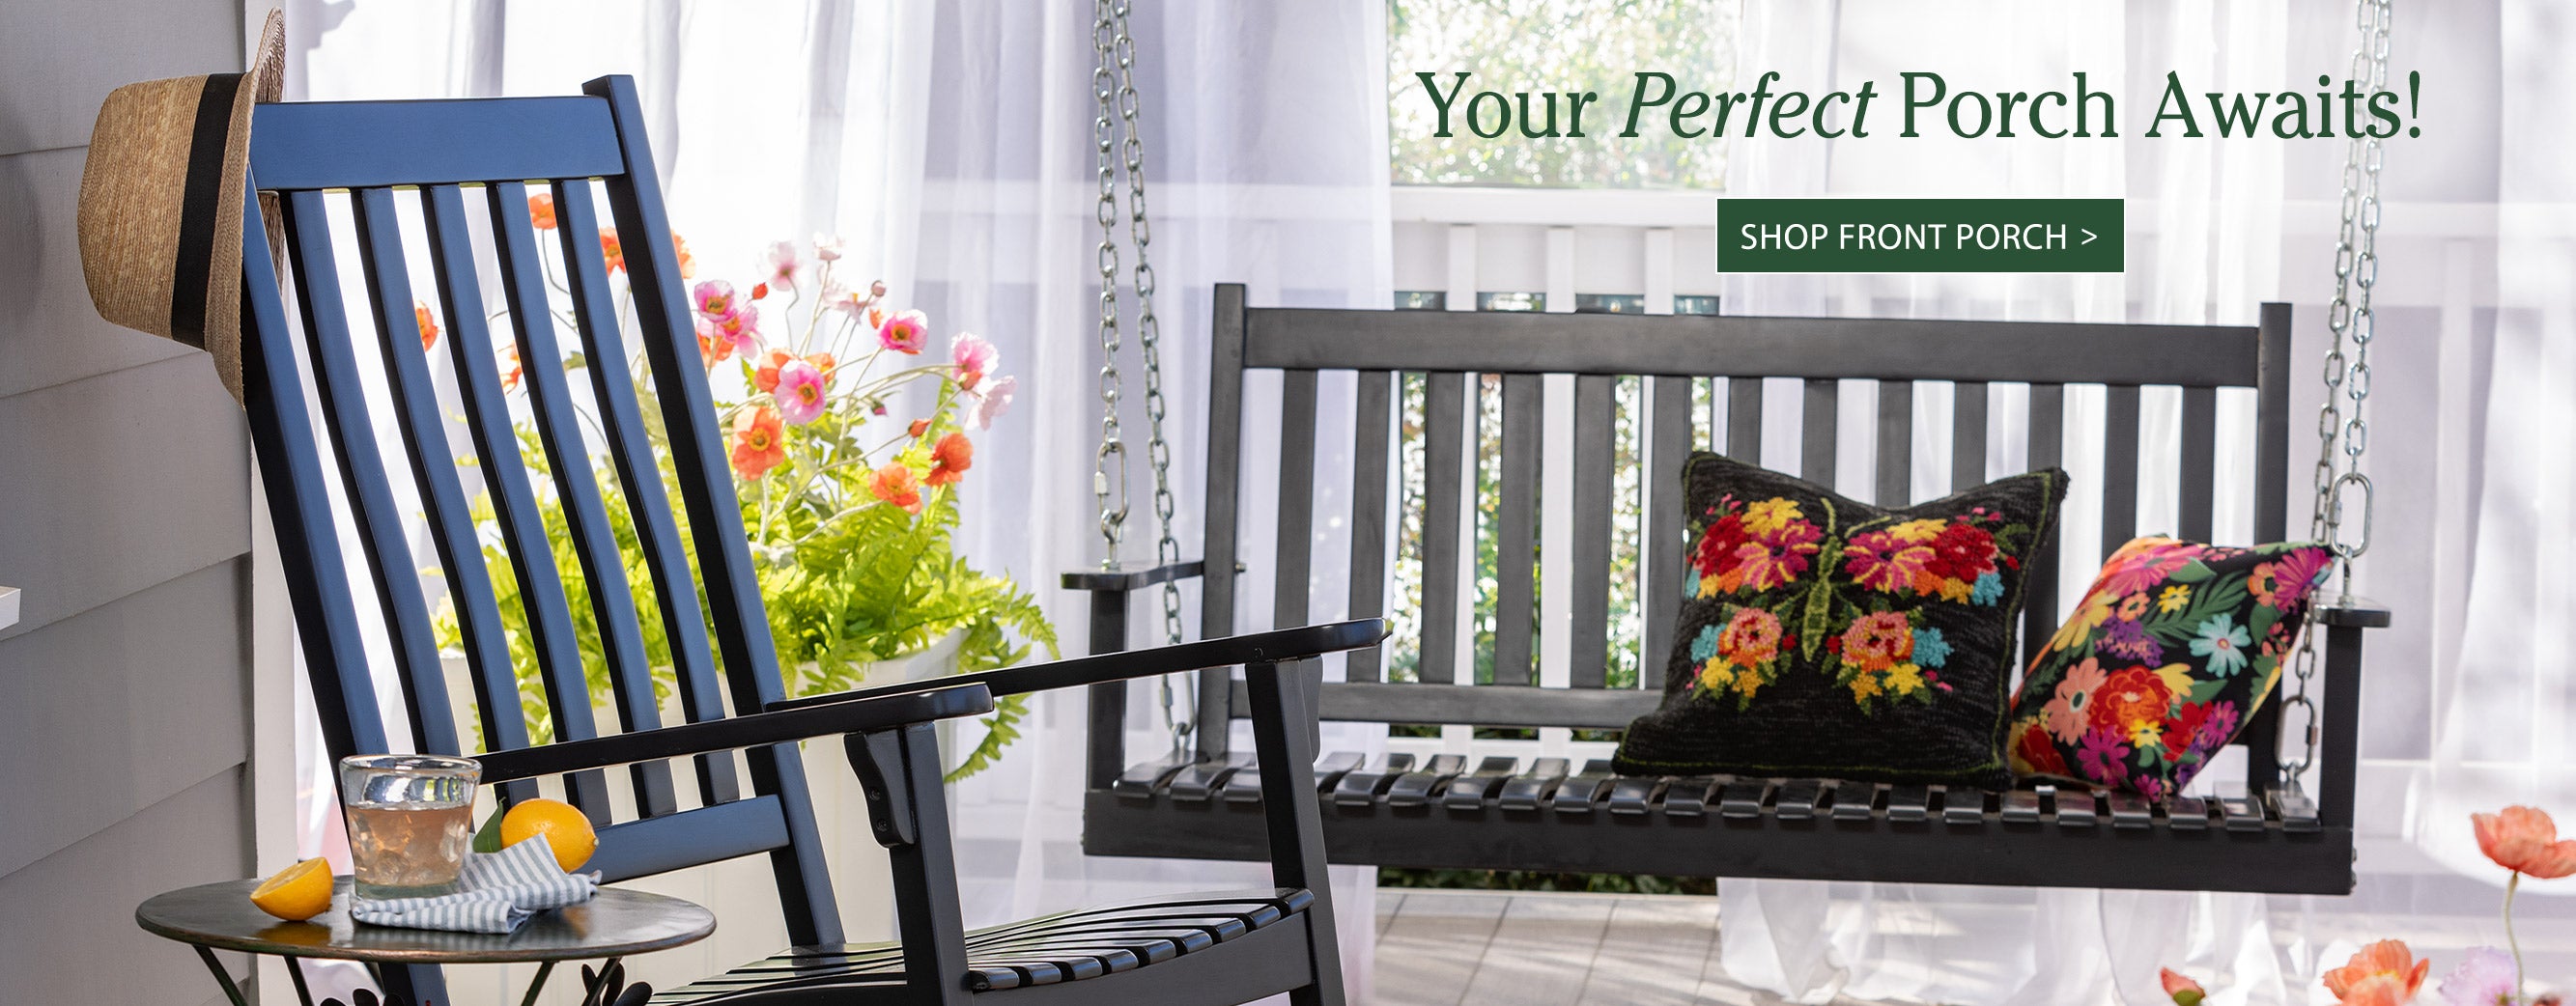 Image of Slatted Wooden Porch Furniture. Your Perfect Porch Awaits! SHOP FRONT PORCH